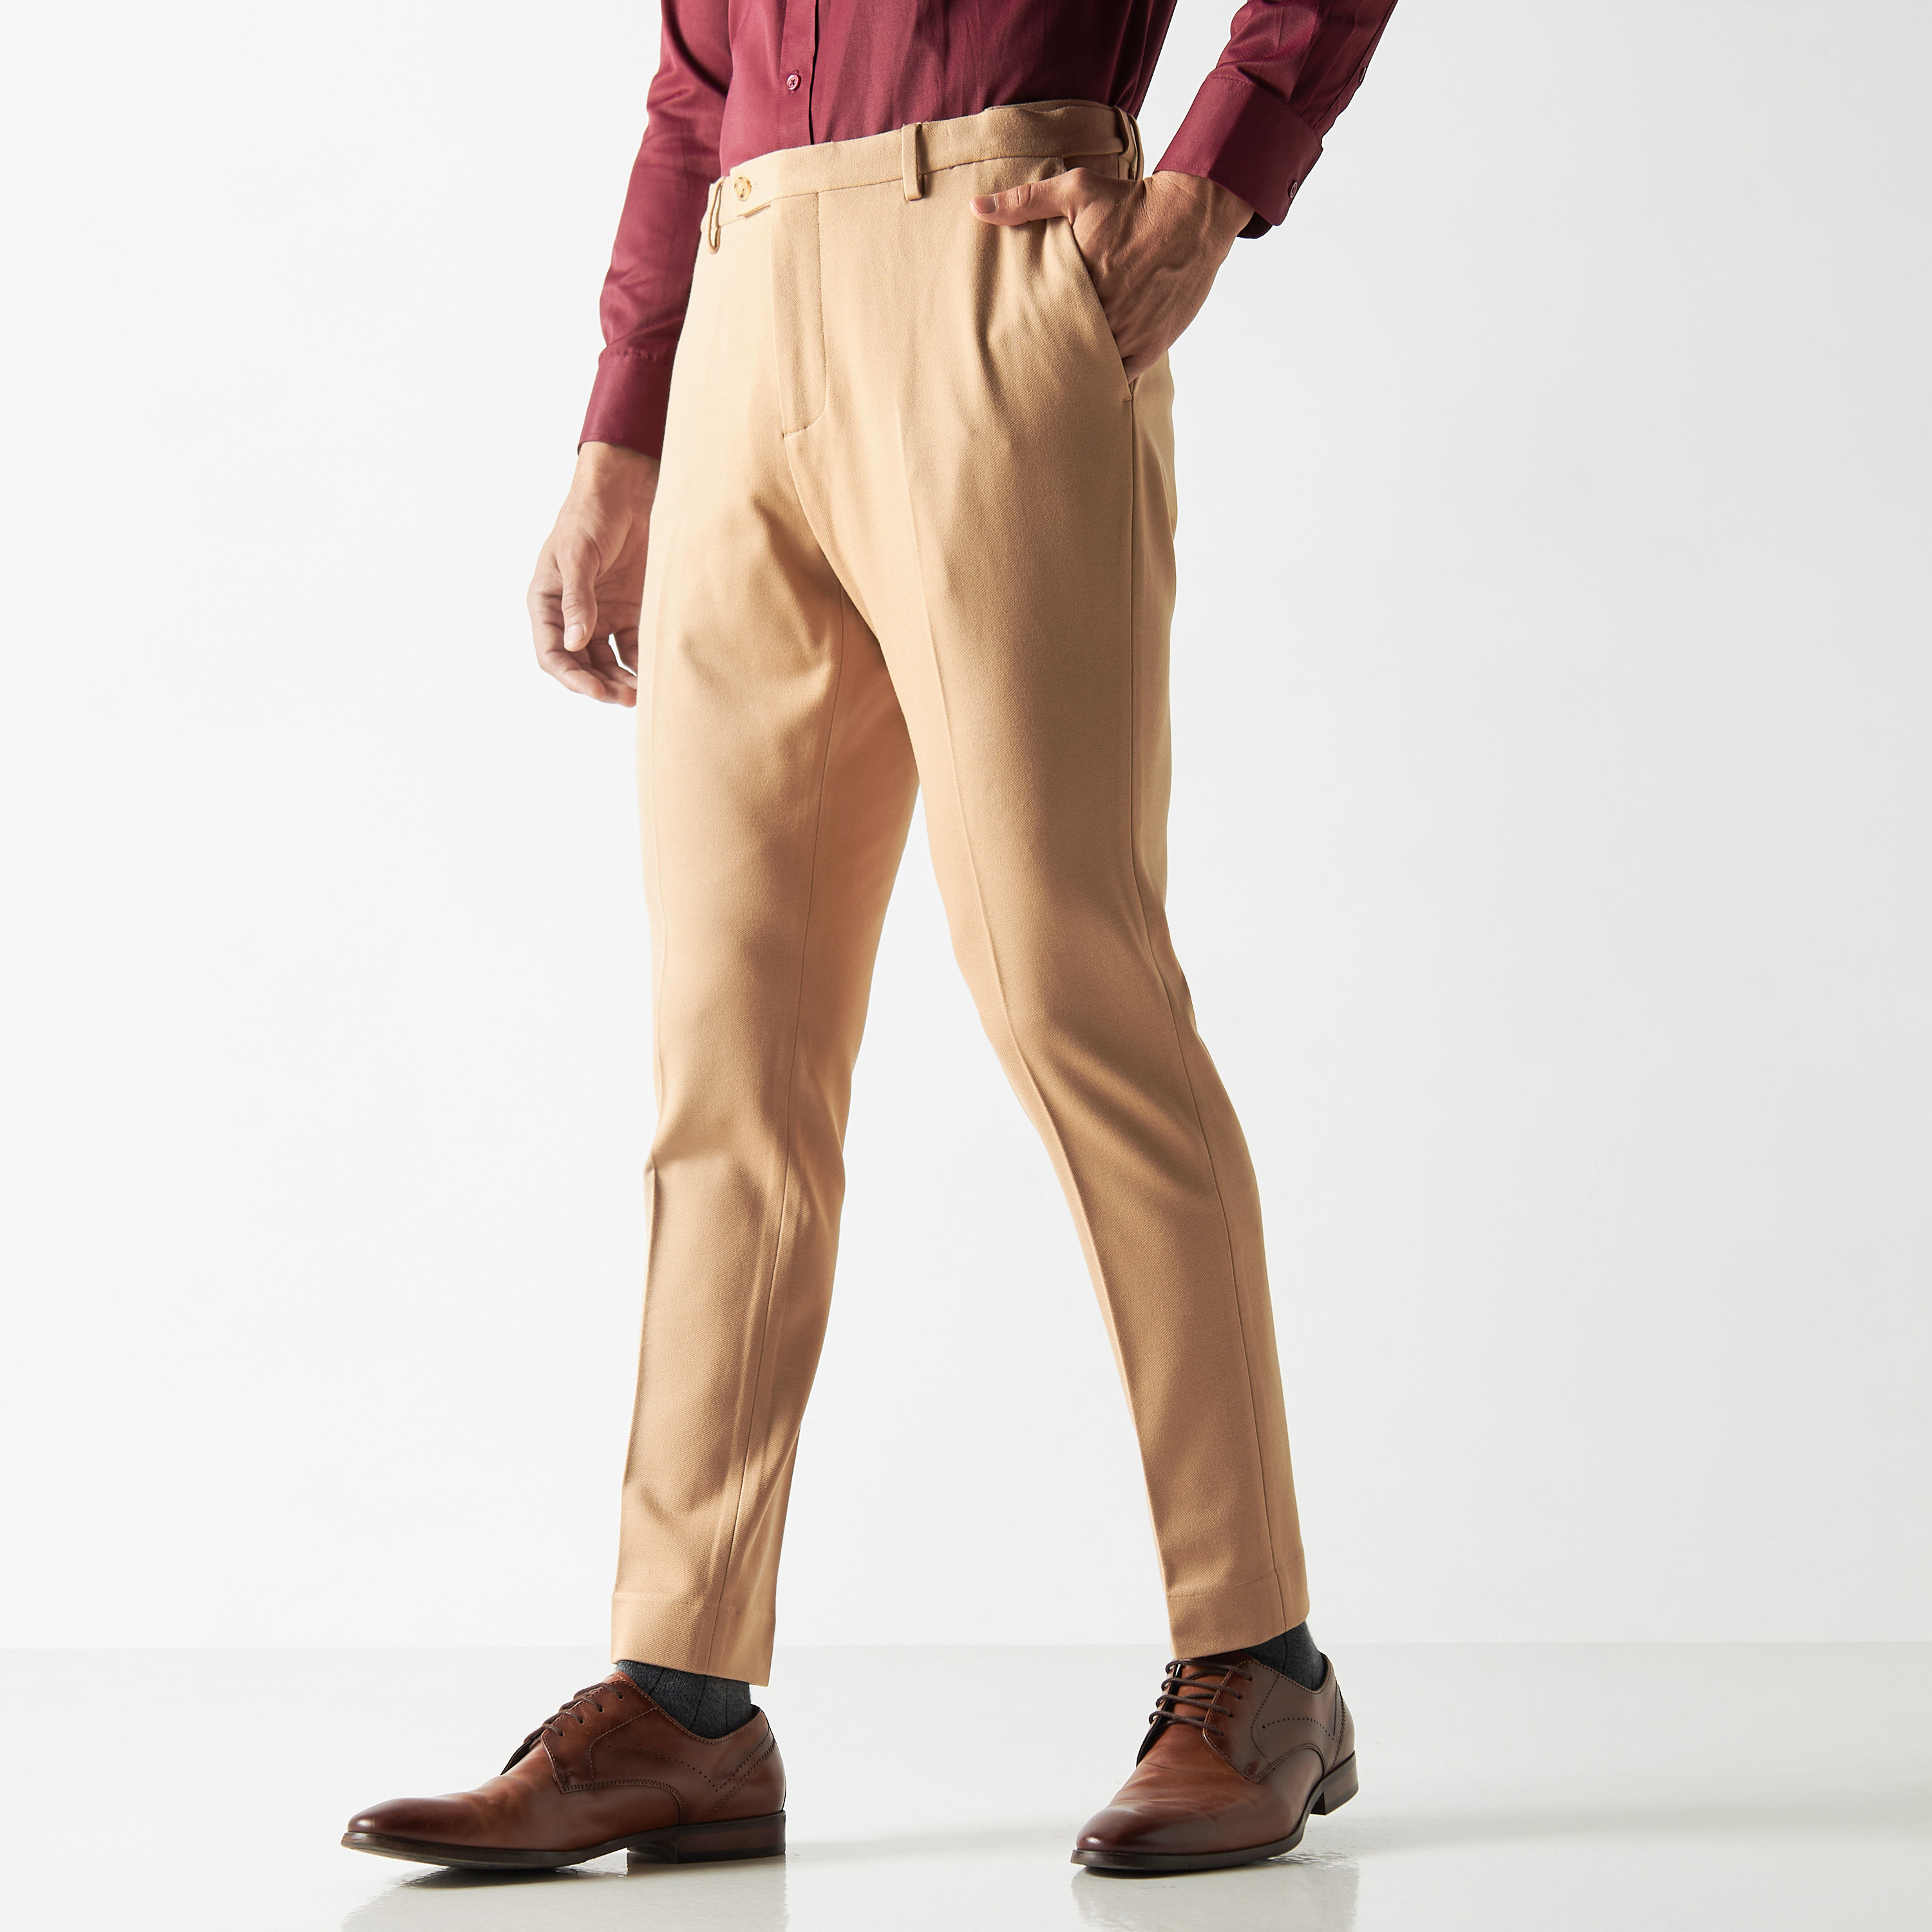 Buy Arrow Patterned Dobby Regular Fit Trousers - NNNOW.com